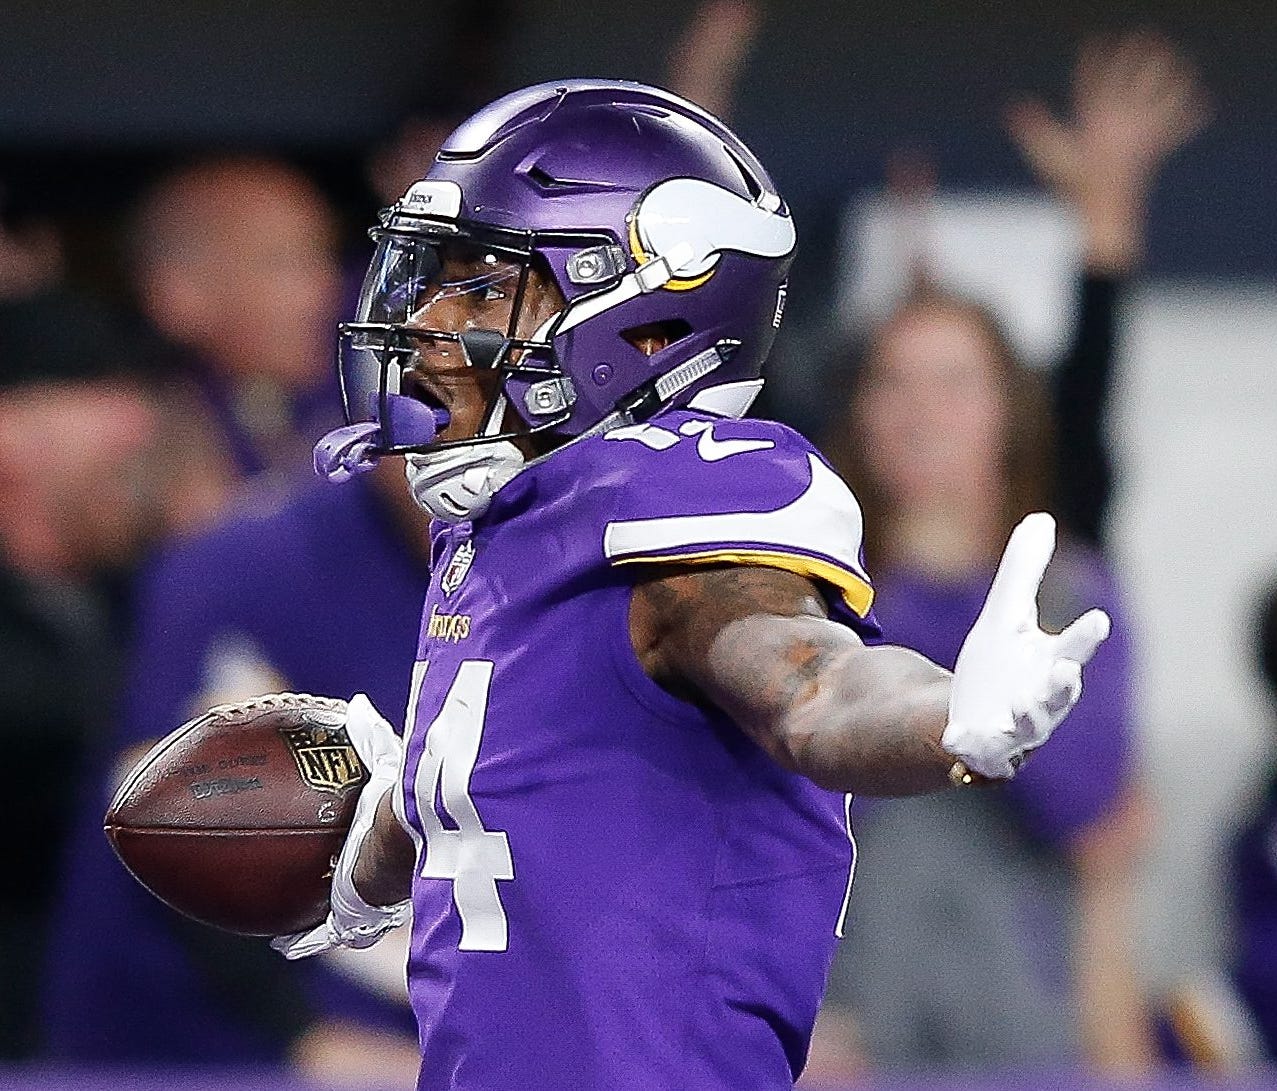 MINNEAPOLIS, MN - JANUARY 14:  Stefon Diggs #14 of the Minnesota Vikings celebrates after scoring a touchdown to defeat the New Orleans Saints in the NFC Divisional Playoff game at U.S. Bank Stadium on January 14, 2018 in Minneapolis, Minnesota.  (Ph